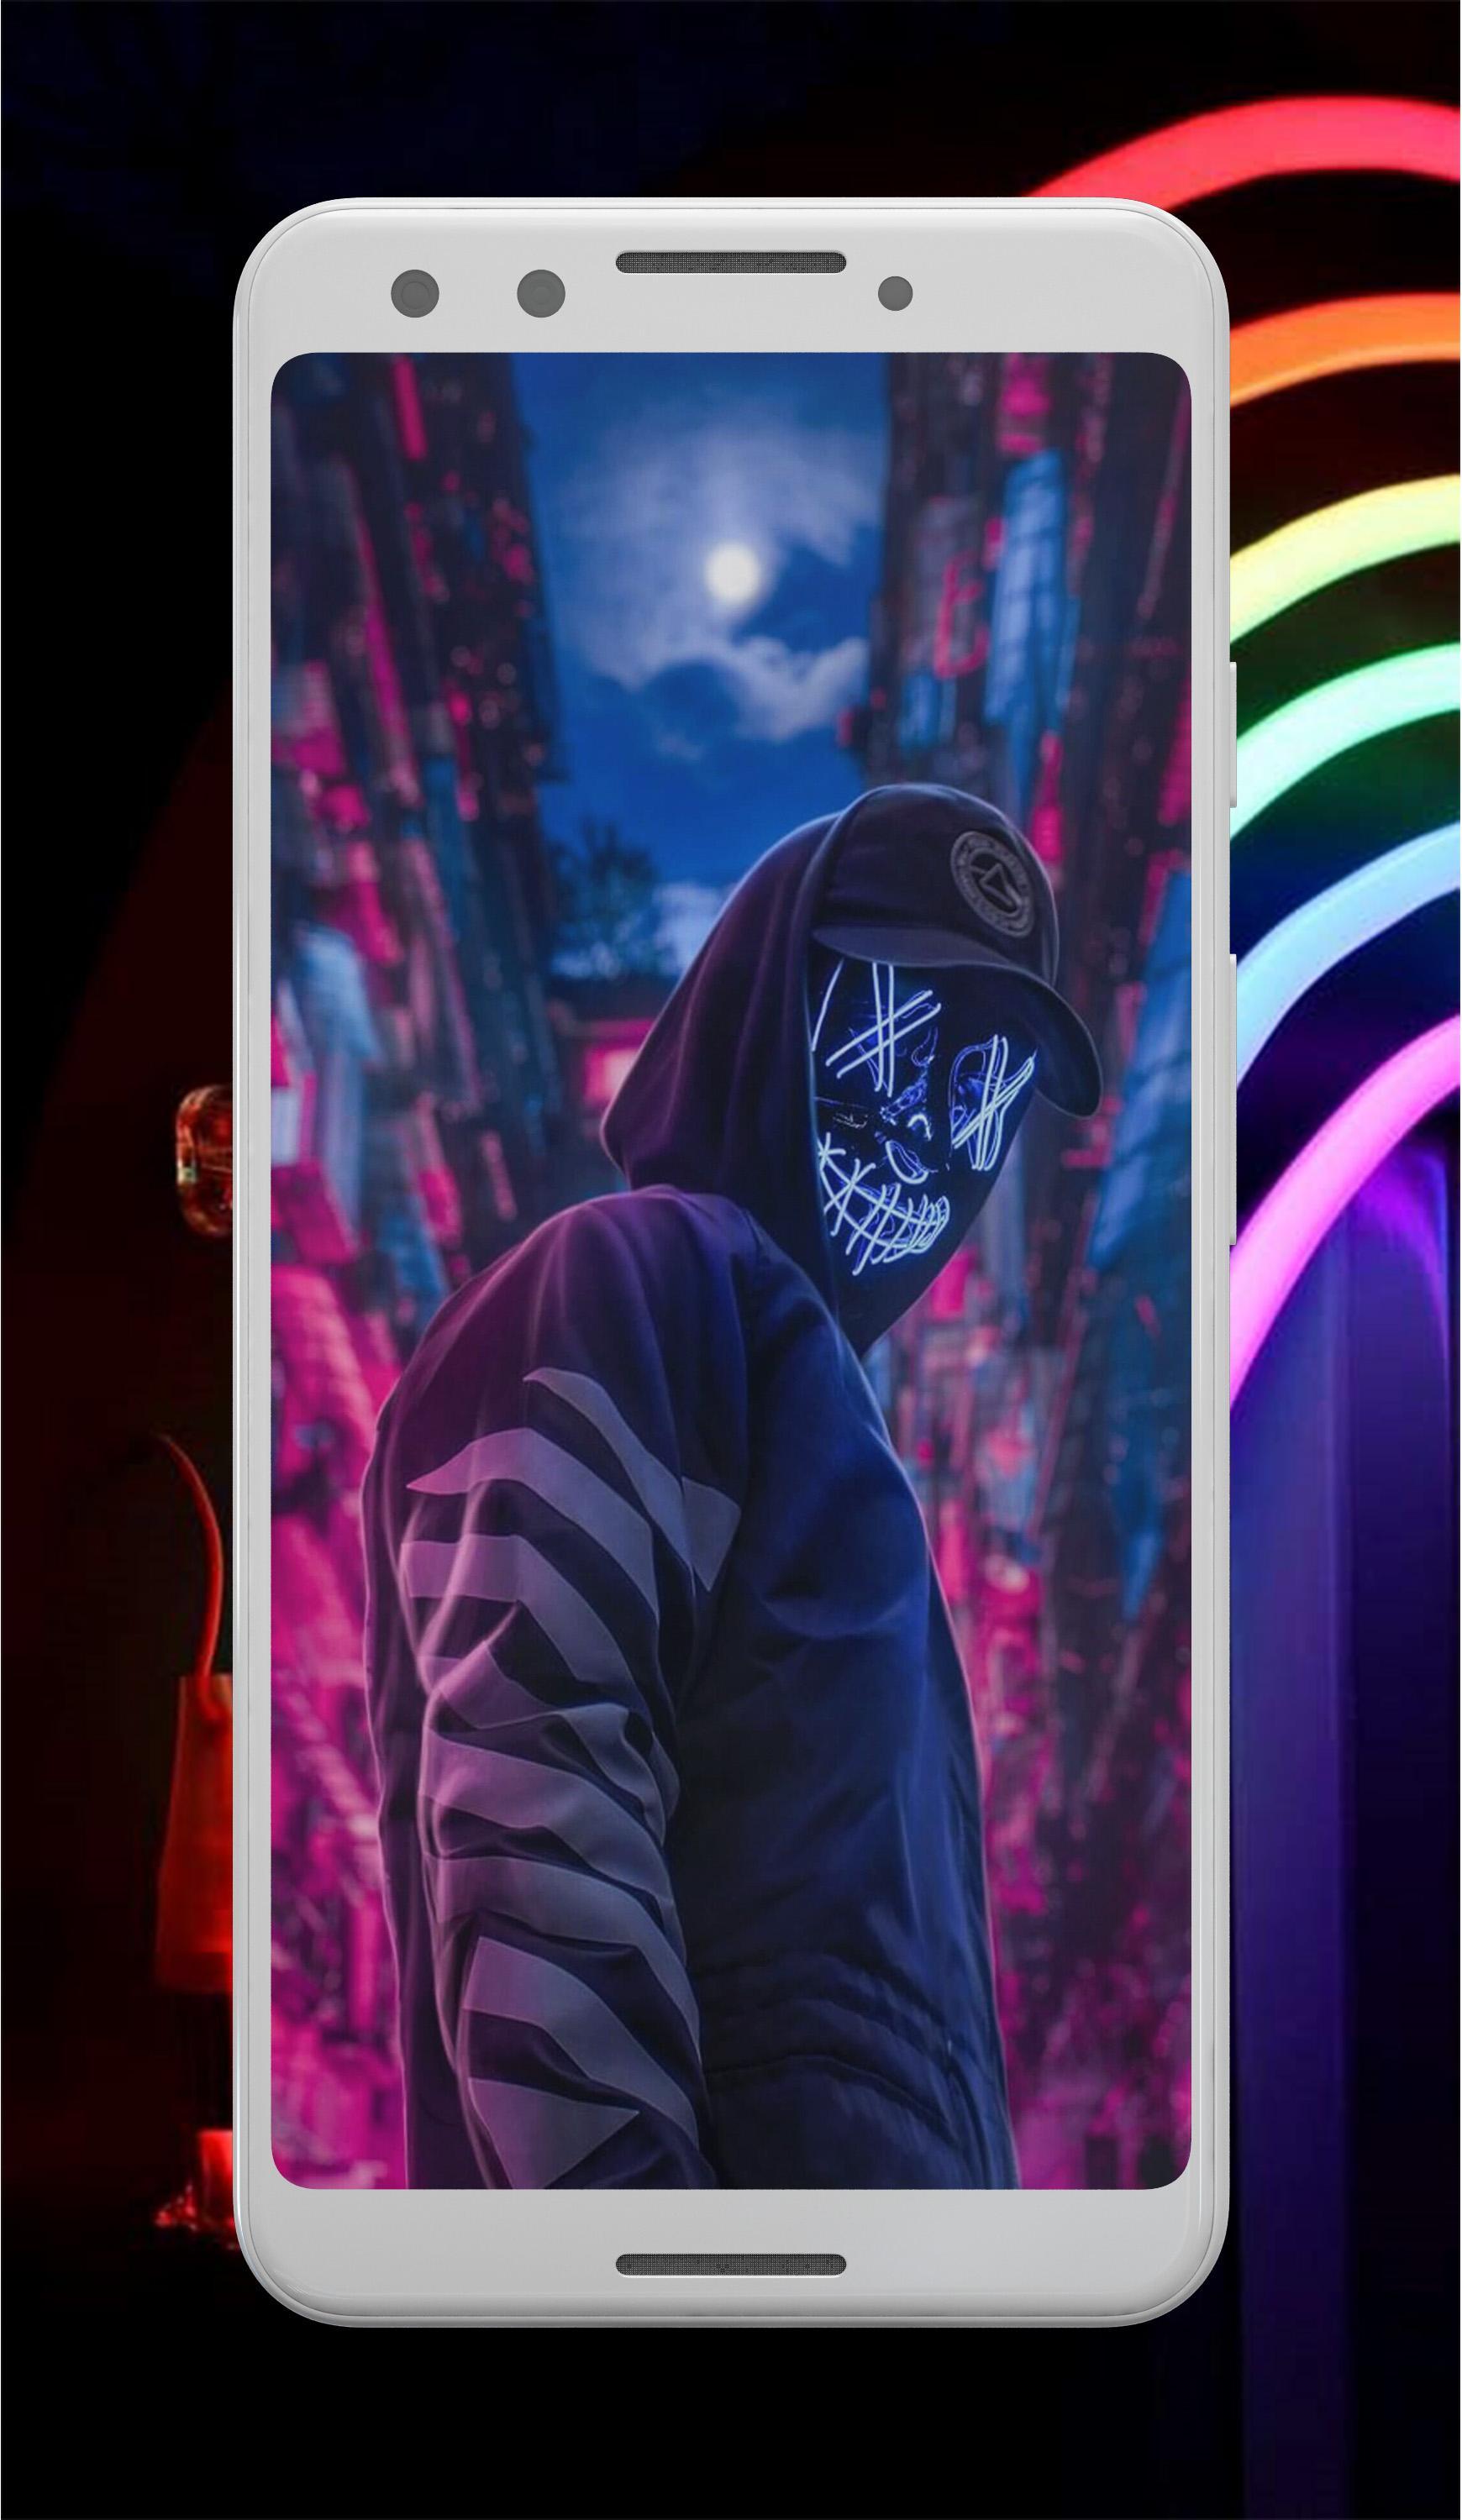 LED Mask Wallpaper APK for Android Download